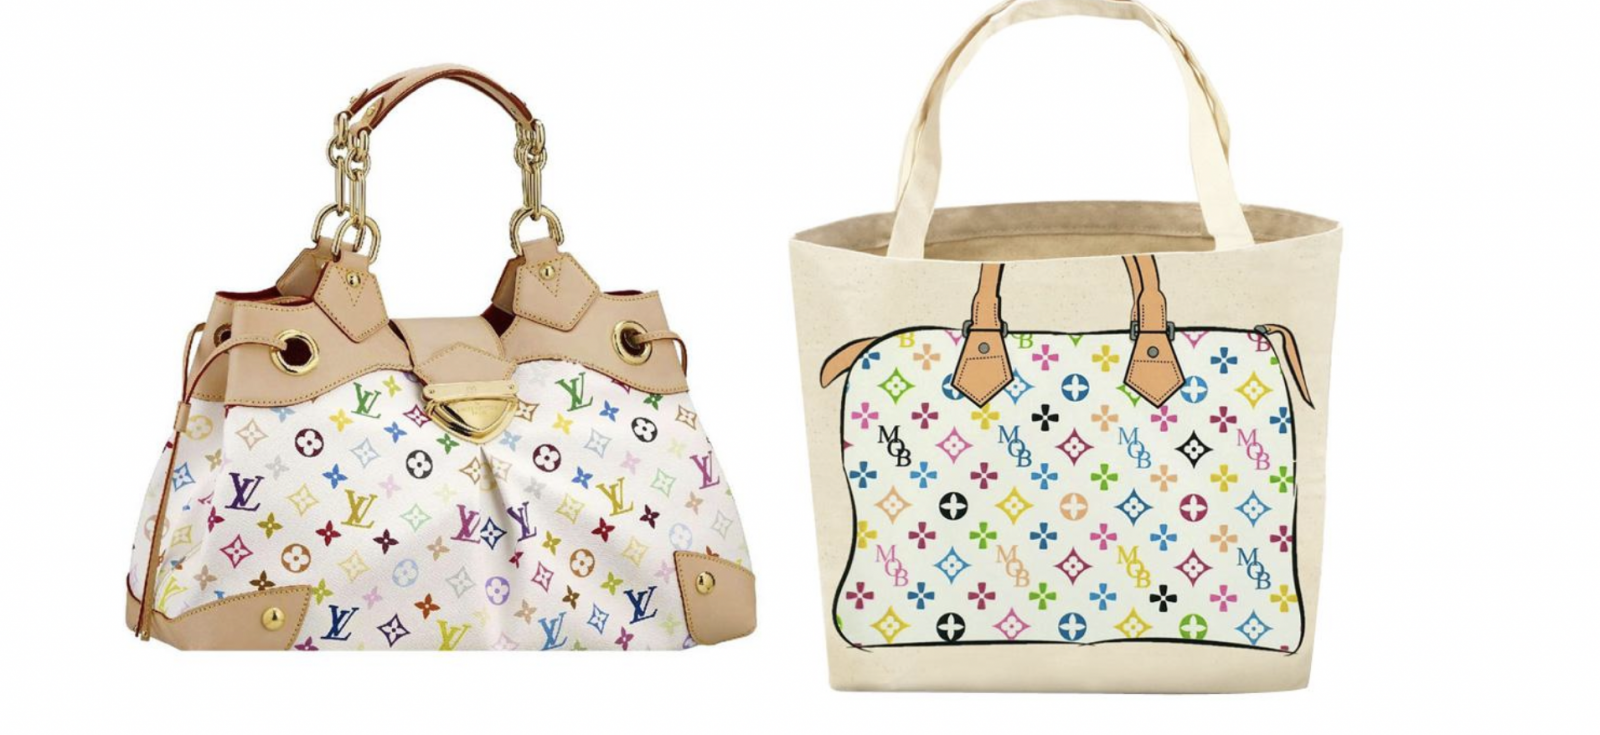 Supreme Court Rejects Louis Vuitton's Appeal Over Parody Tote Bags